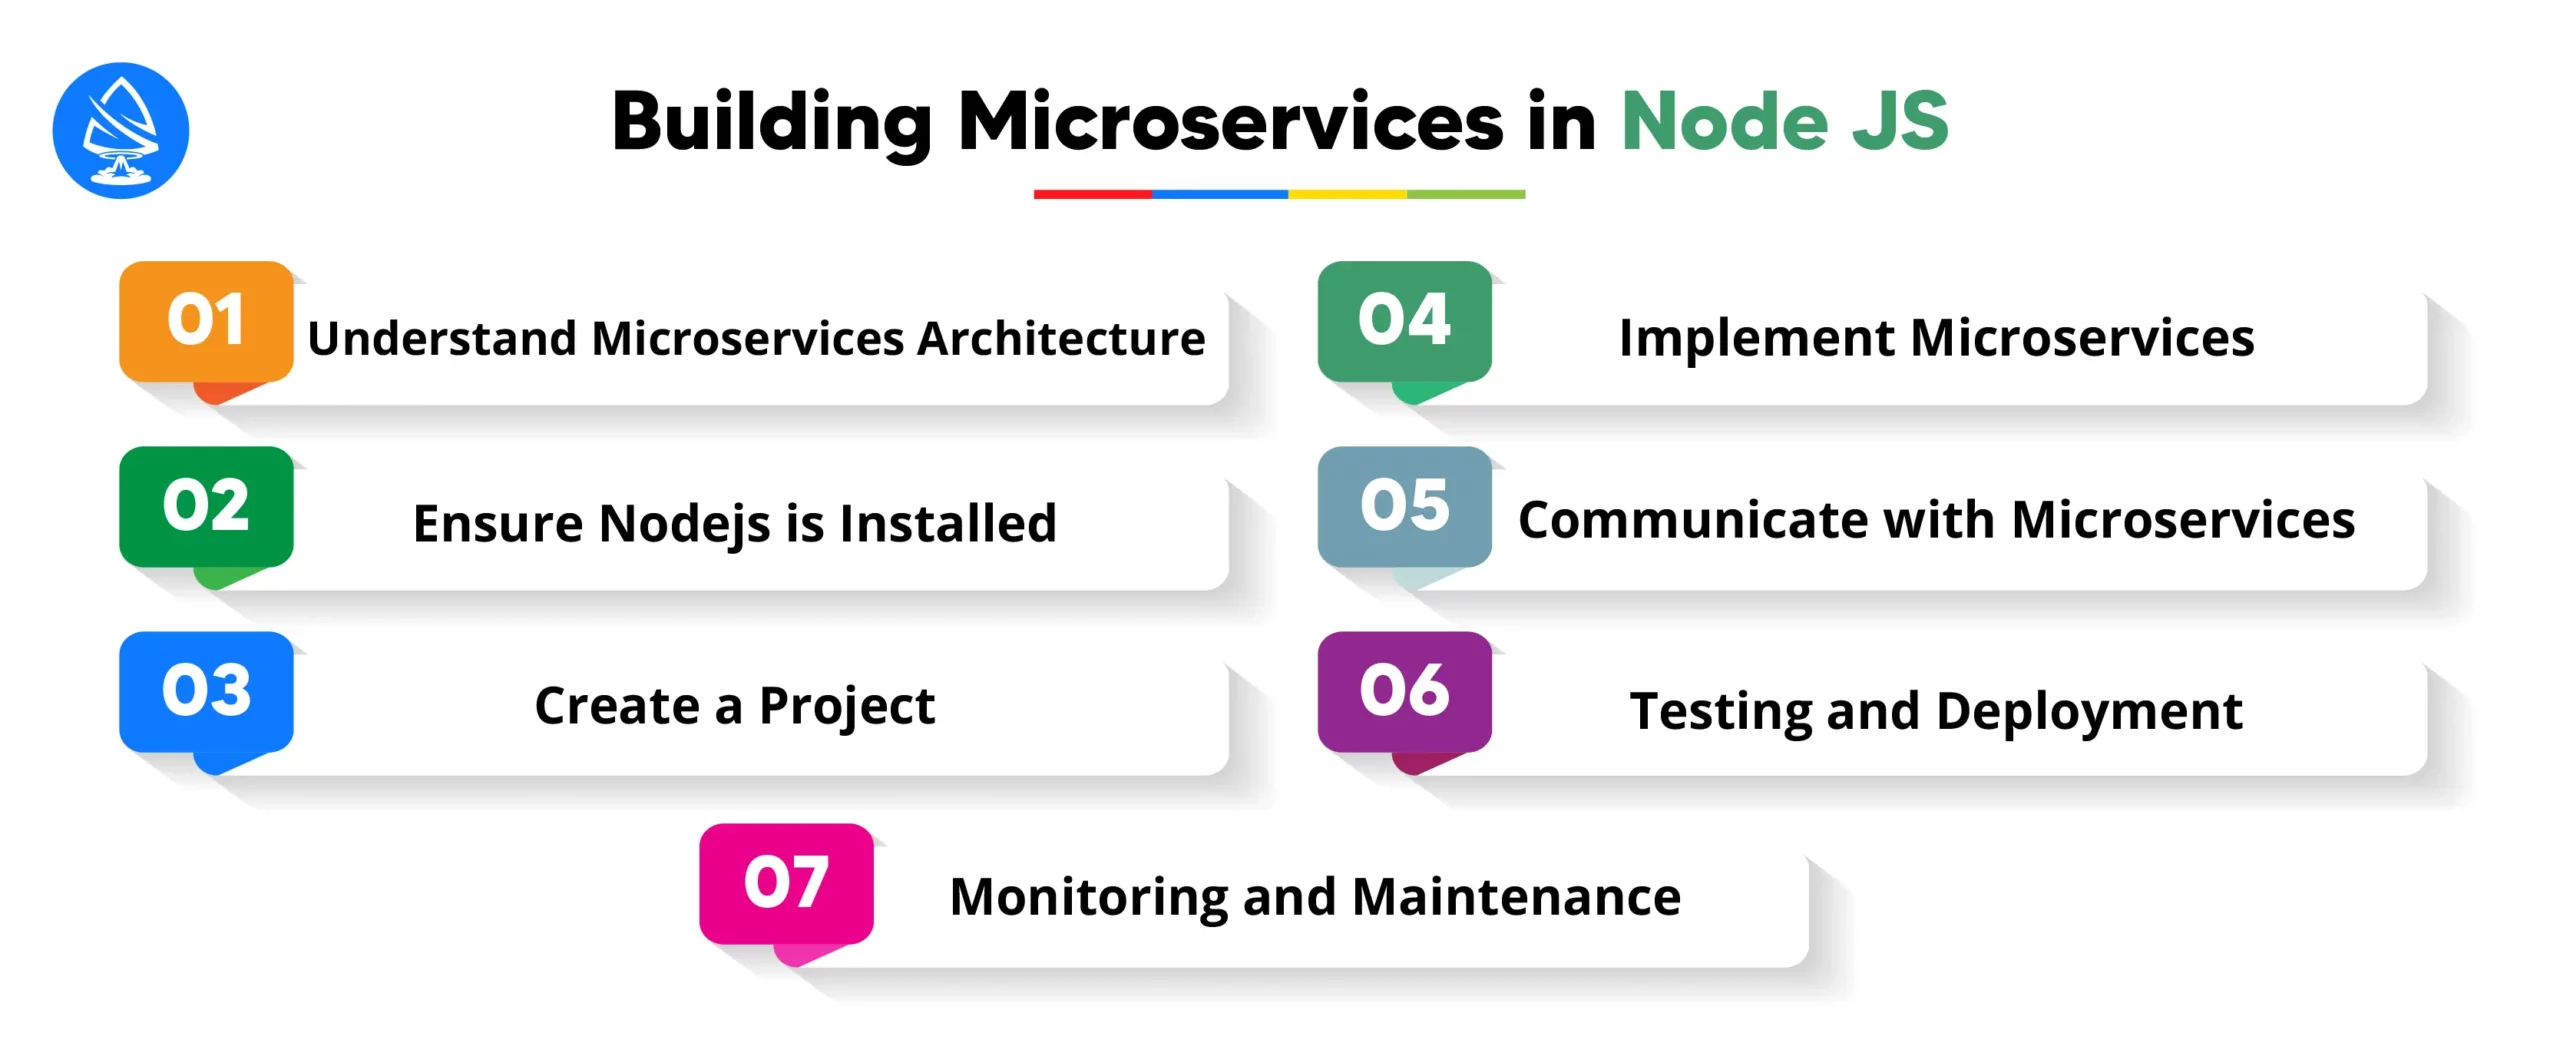 Building Microservices in Node JS 